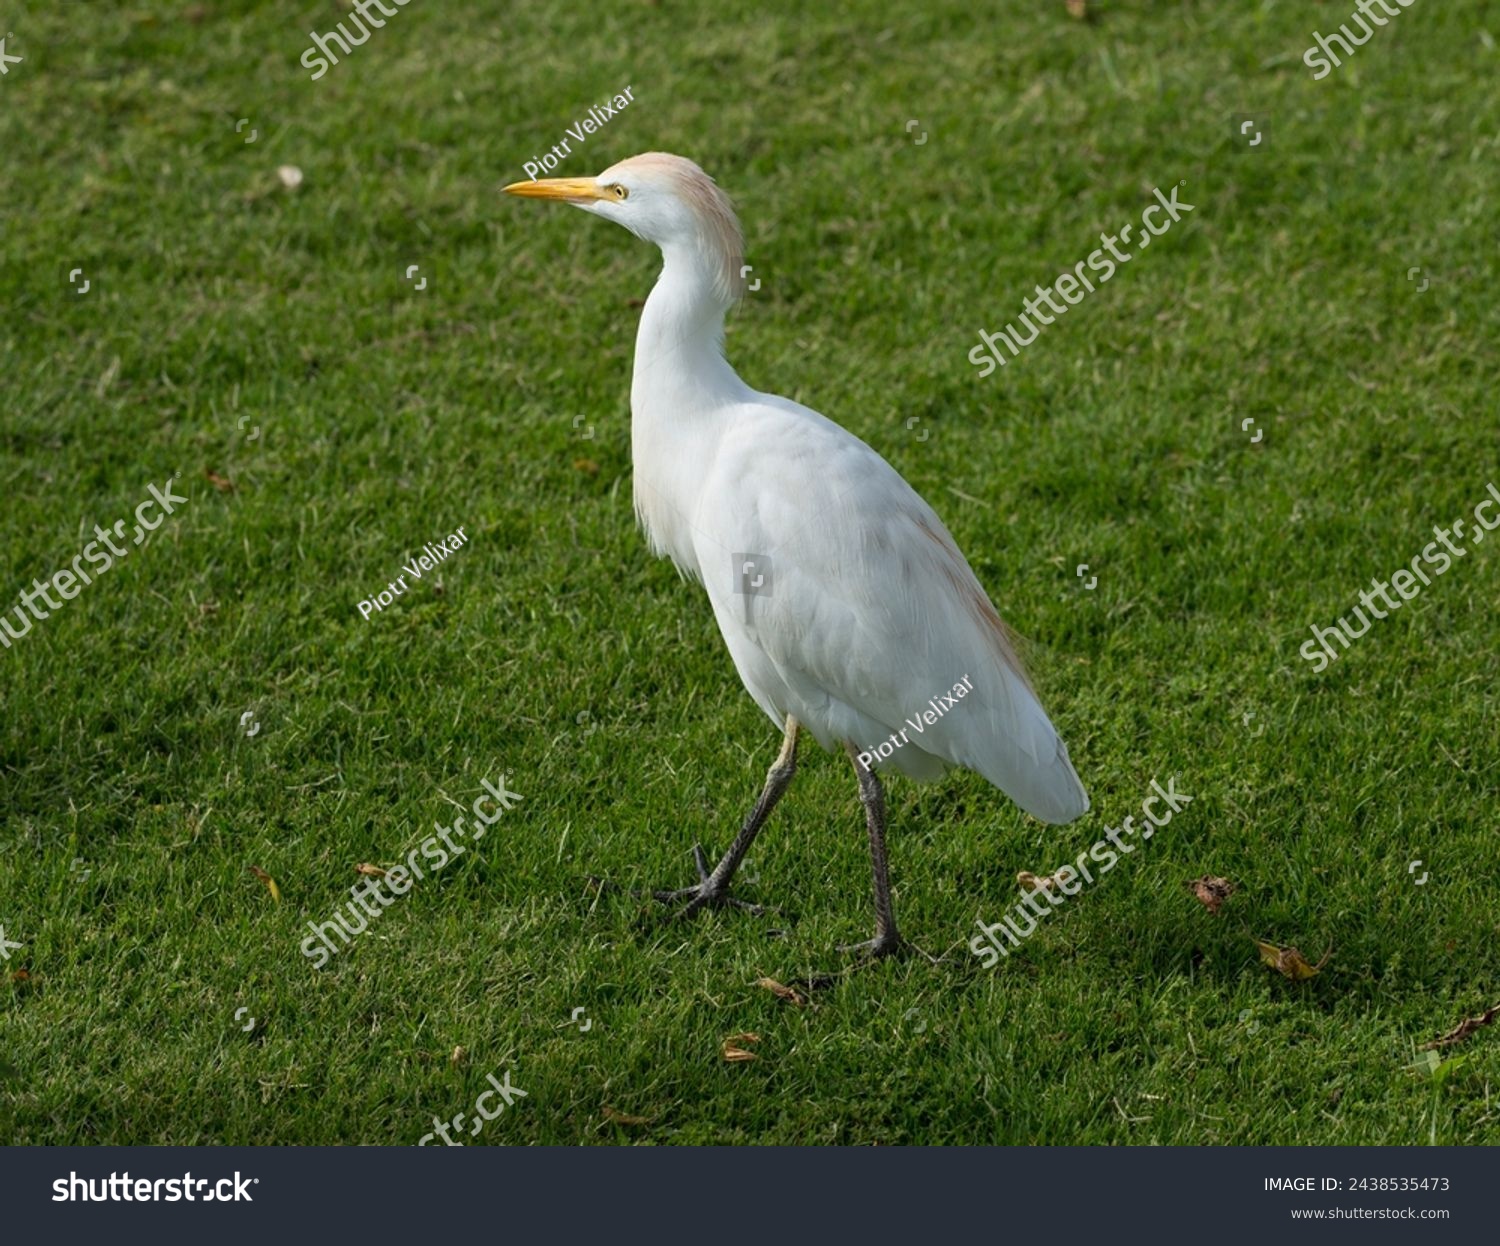 The western cattle egret (Bubulcus ibis) is a species of heron (family Ardeidae) found in the tropics. Fauna of the Sinai Peninsula. #2438535473